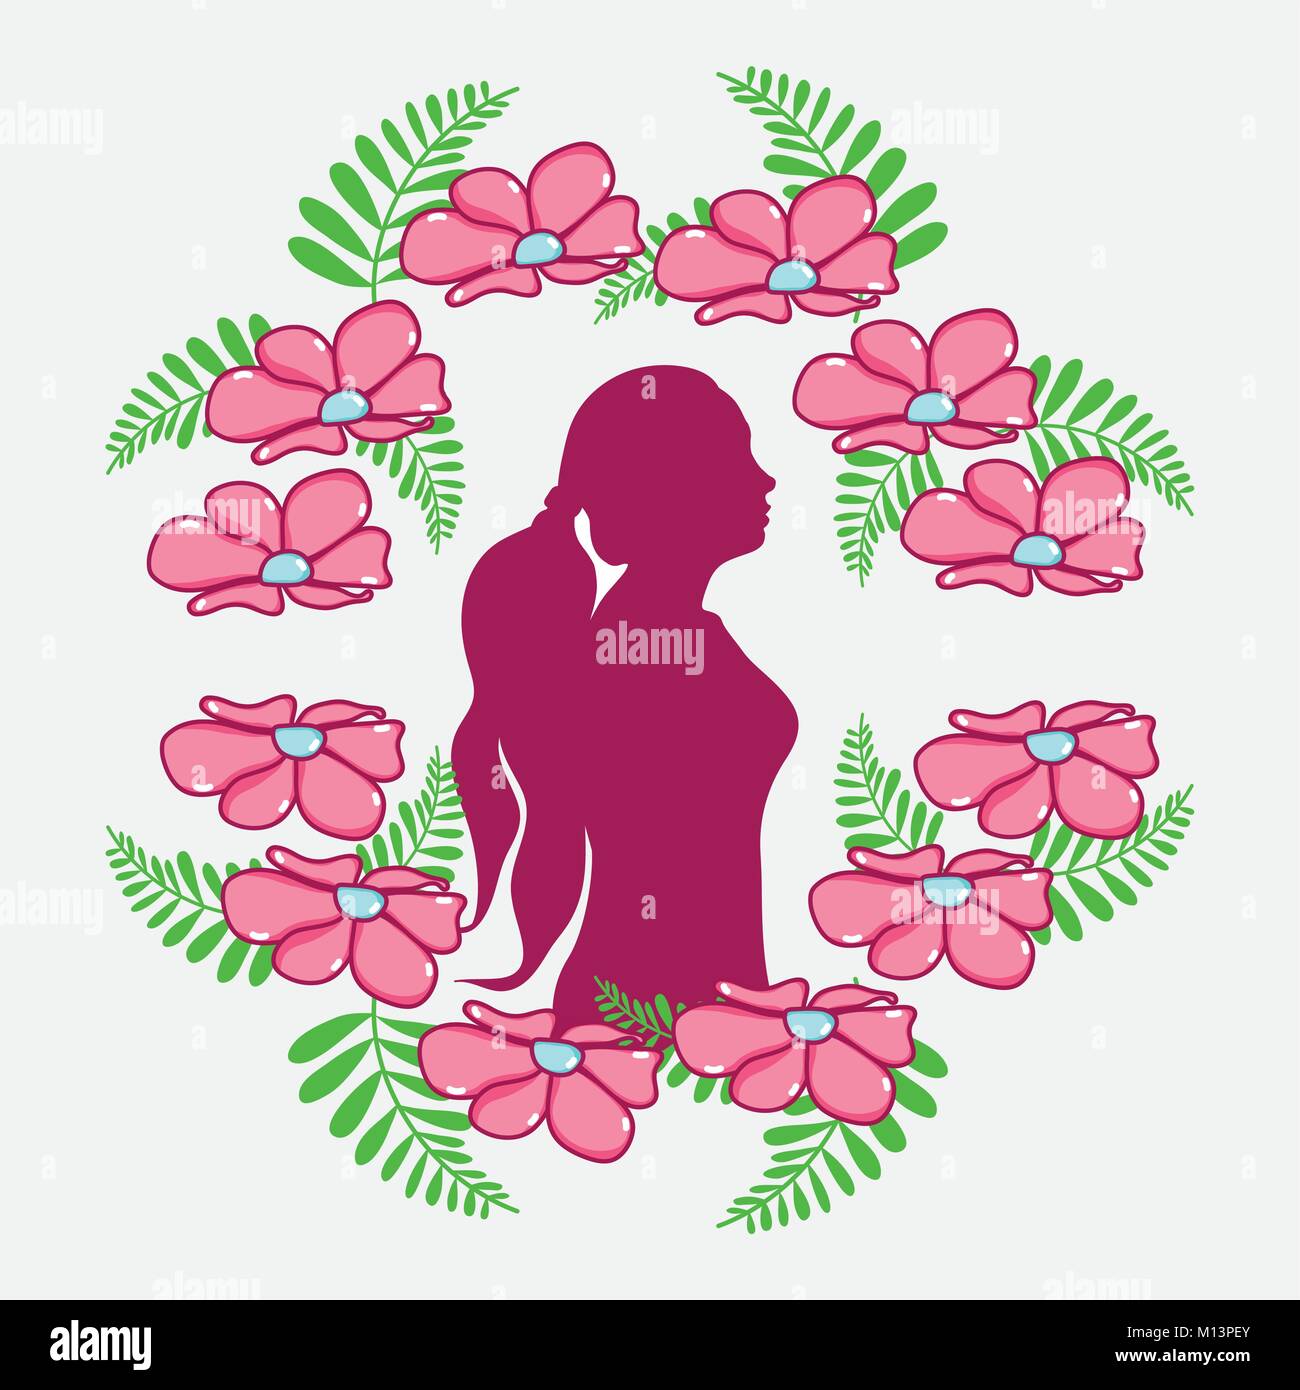 womens day with flowers and woman silhouette Stock Vector